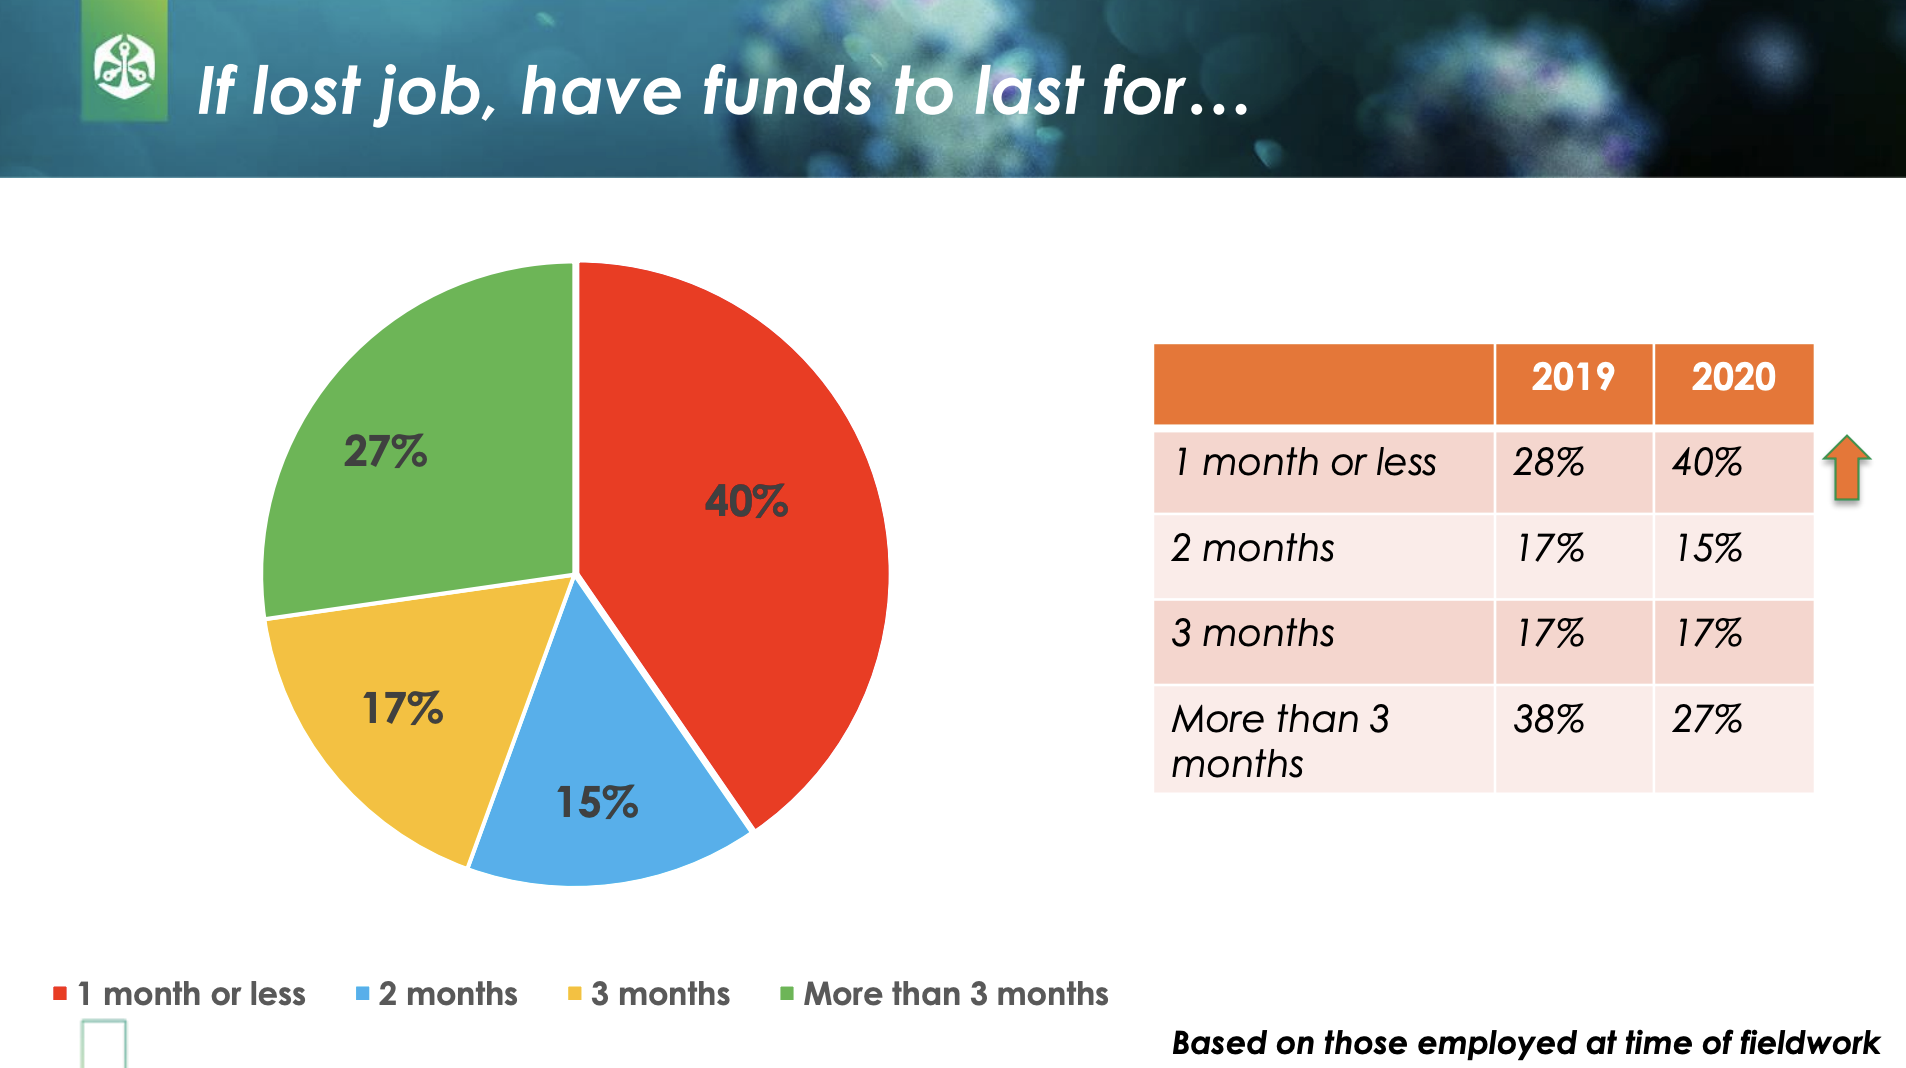 40% of South Africans say that if they lost their job they have funds to last for 1 month or less